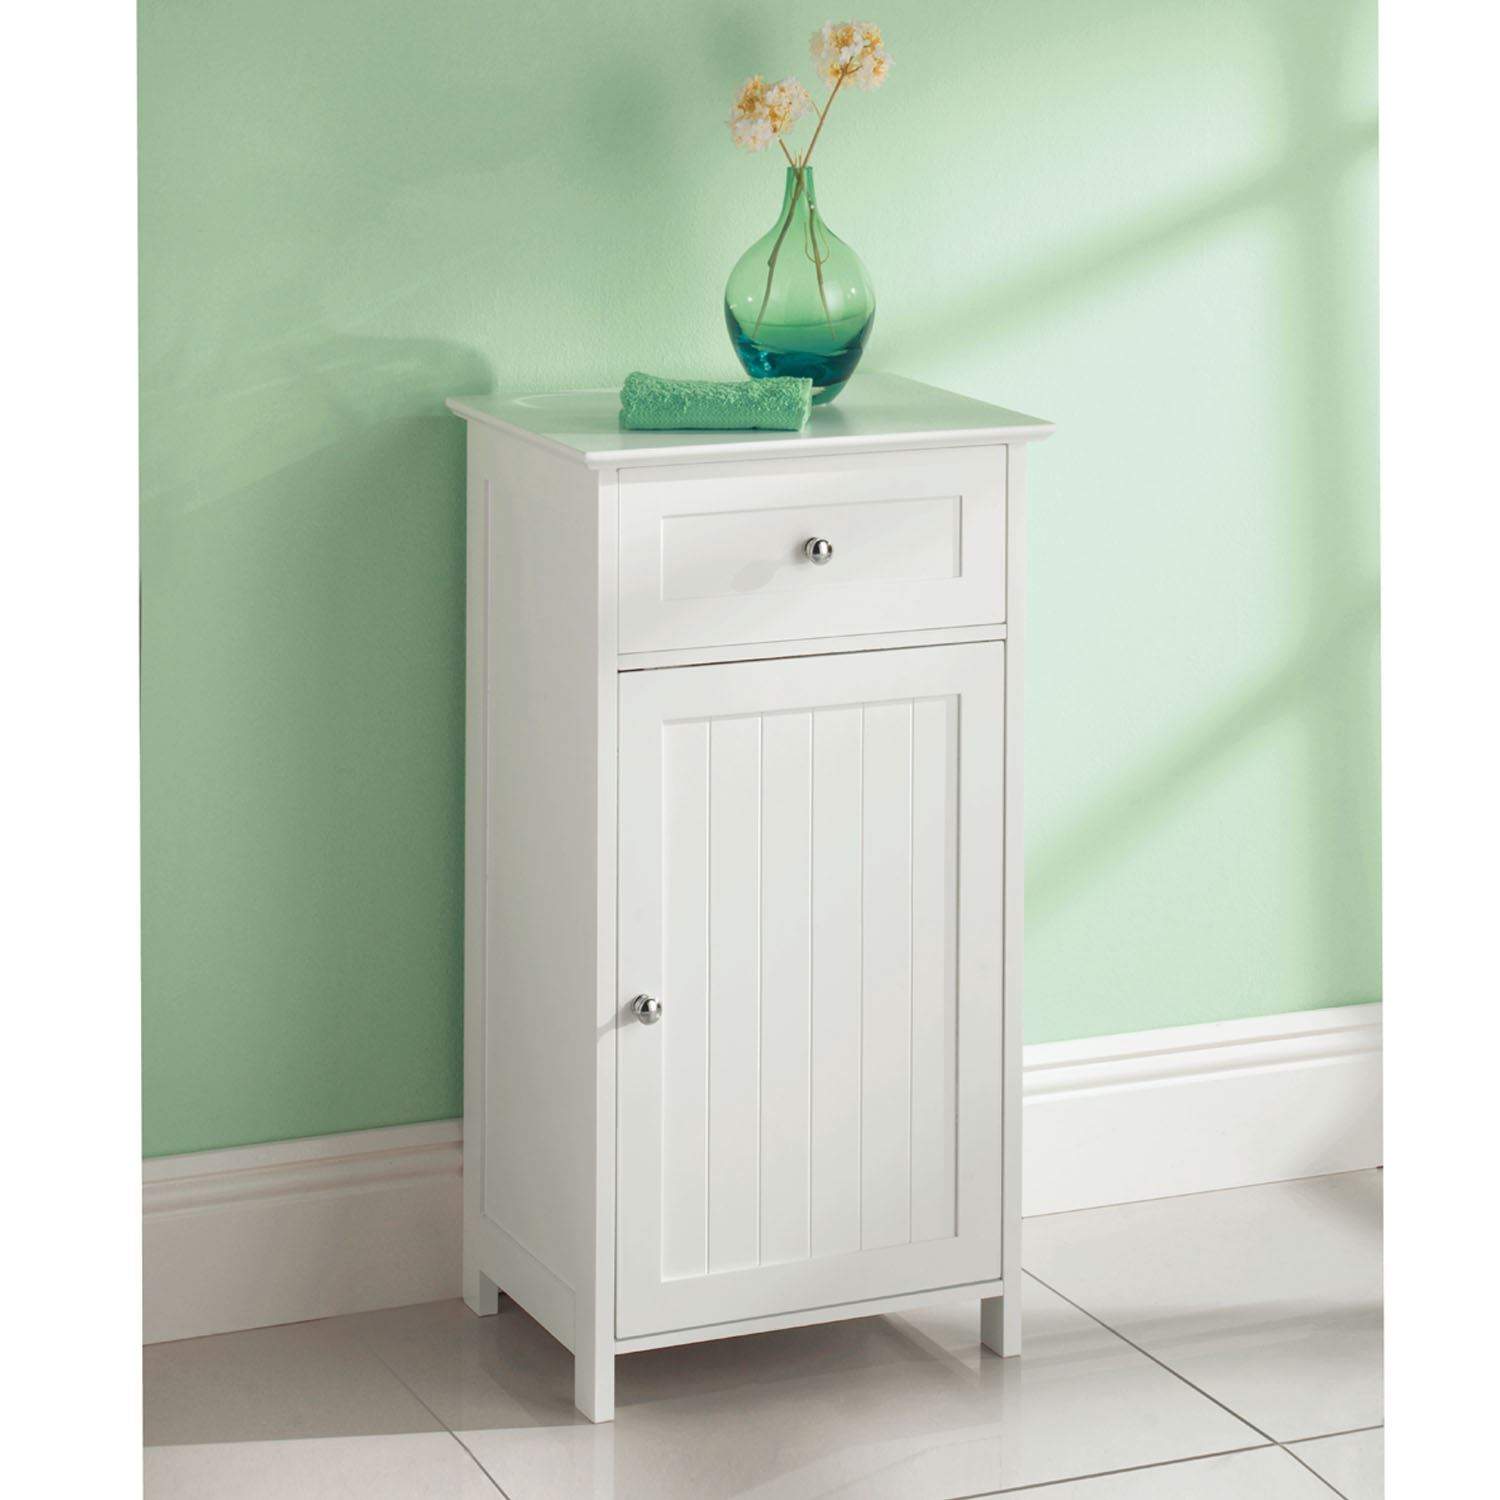 free standing bathroom cabinets with drawers white wood free standing bathroom storage cabinet unit exclusive white EWKMIDH